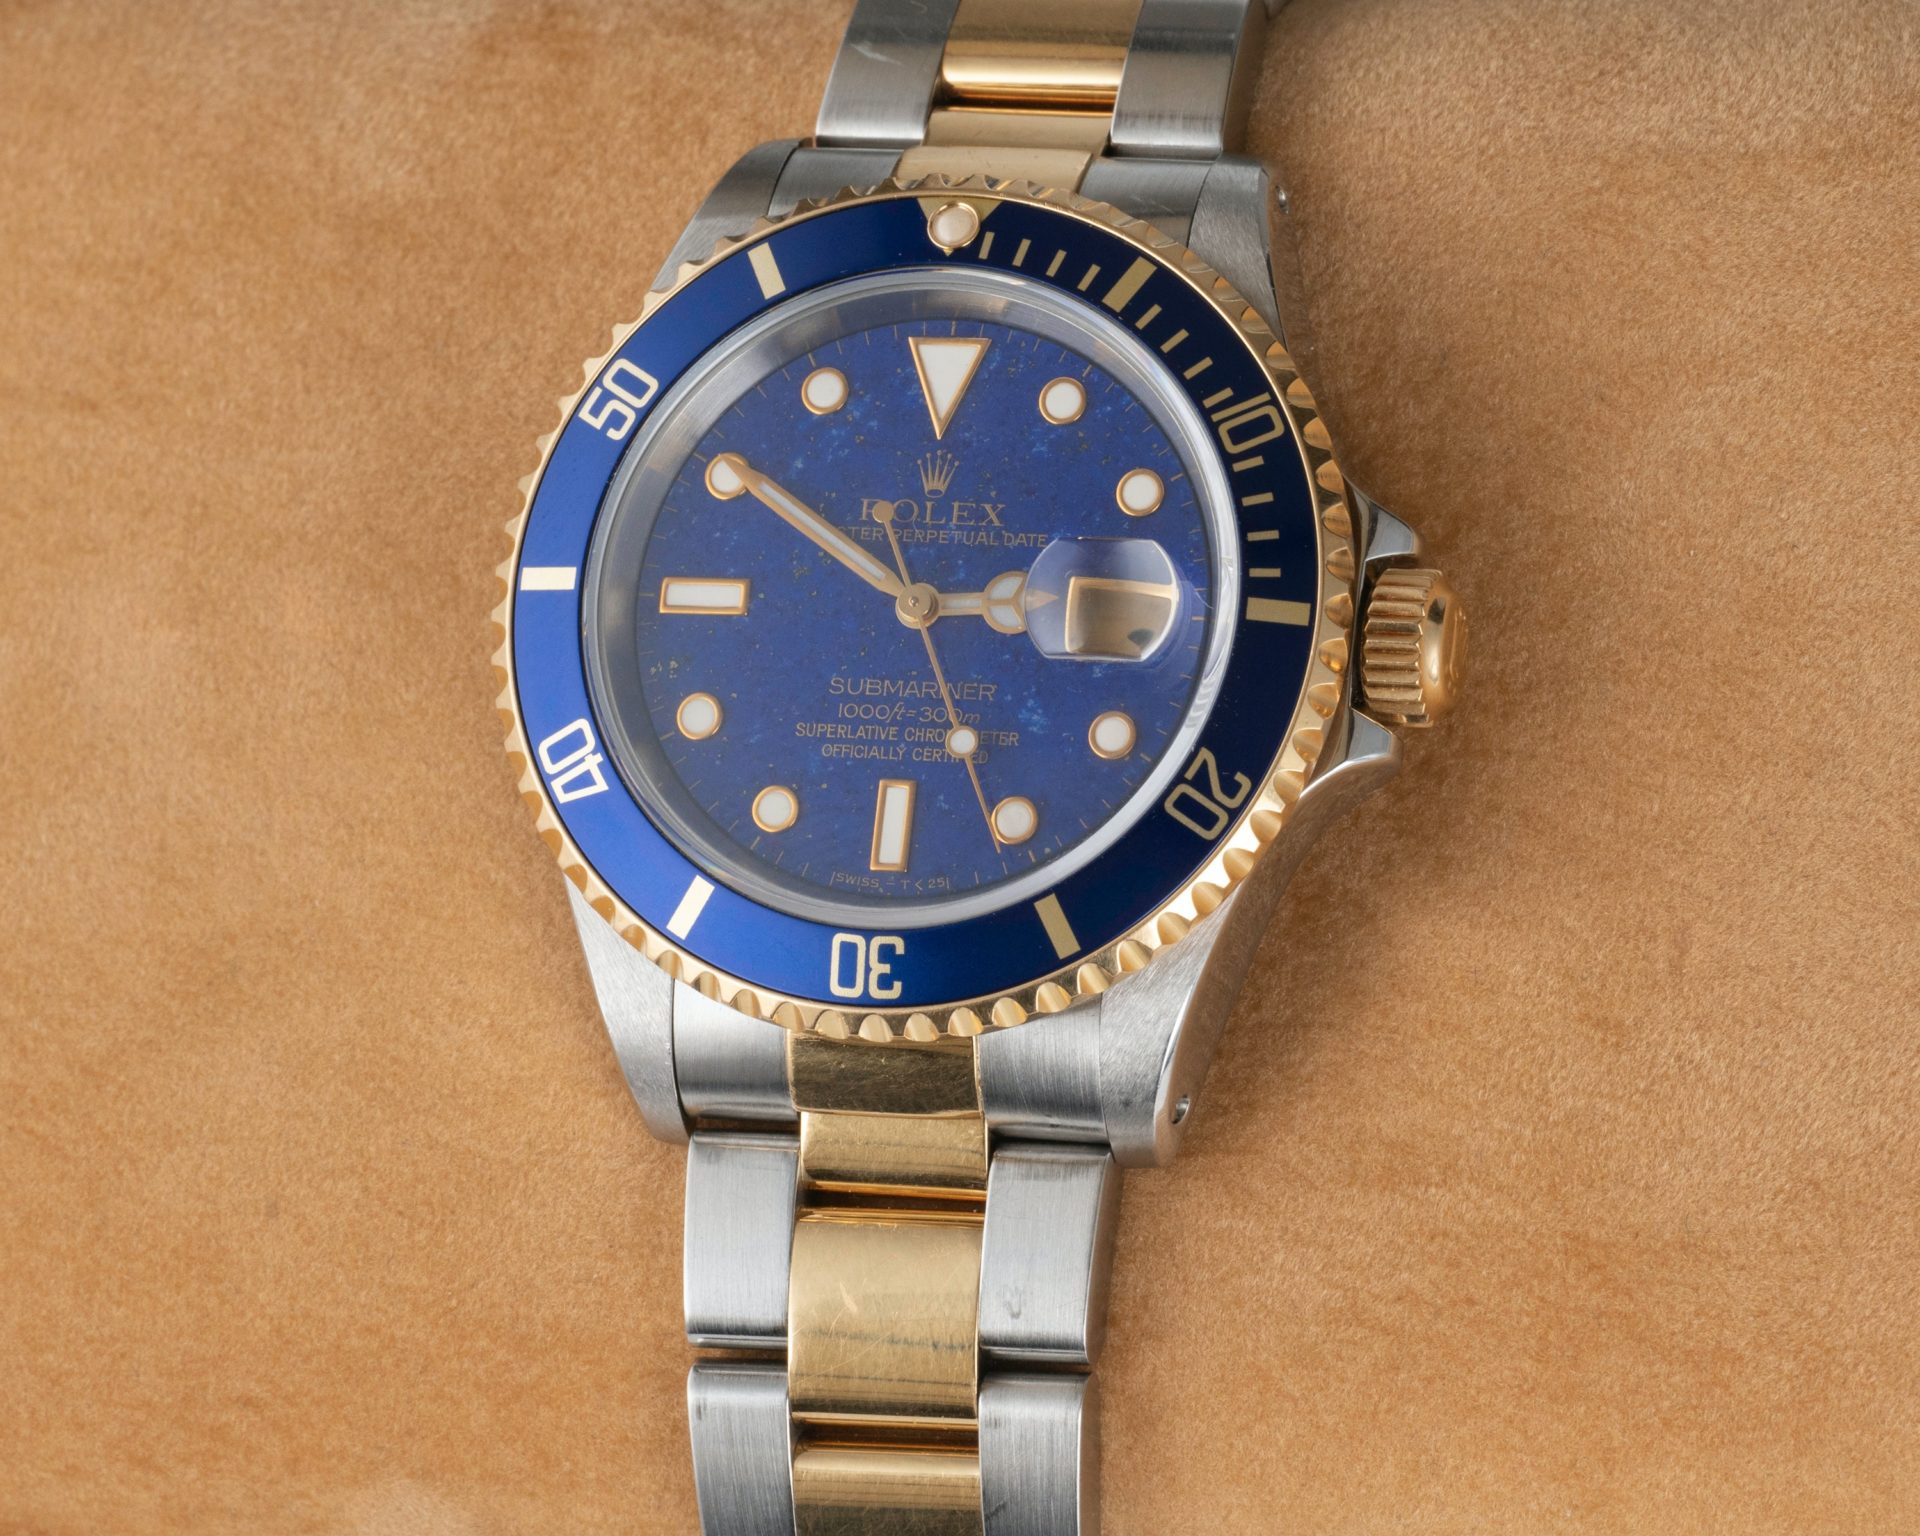 Xuddpdtx 1993 rolex submariner with lapis dial 2